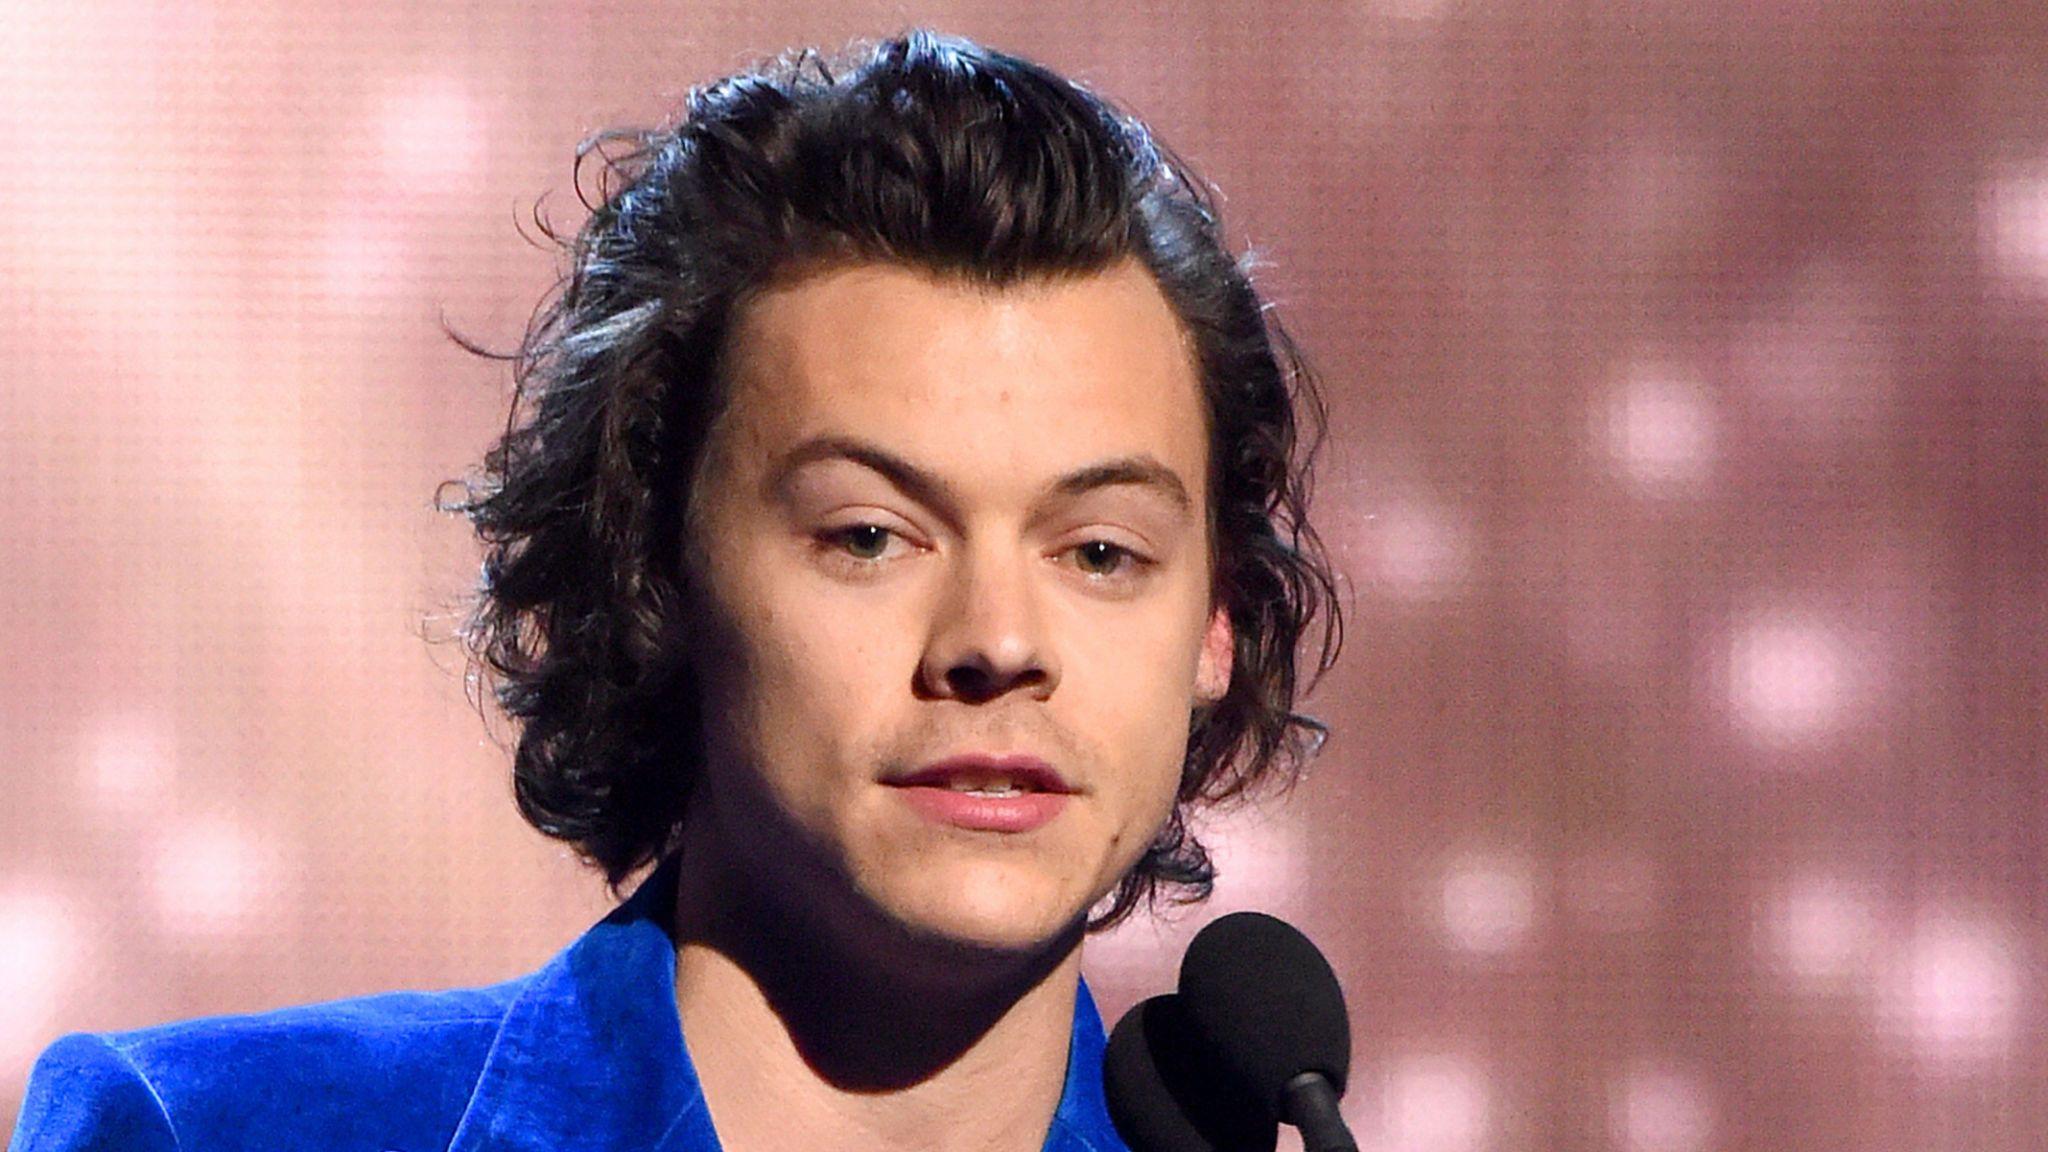 Harry Styles turns down Prince Eric role in The Little Mermaid